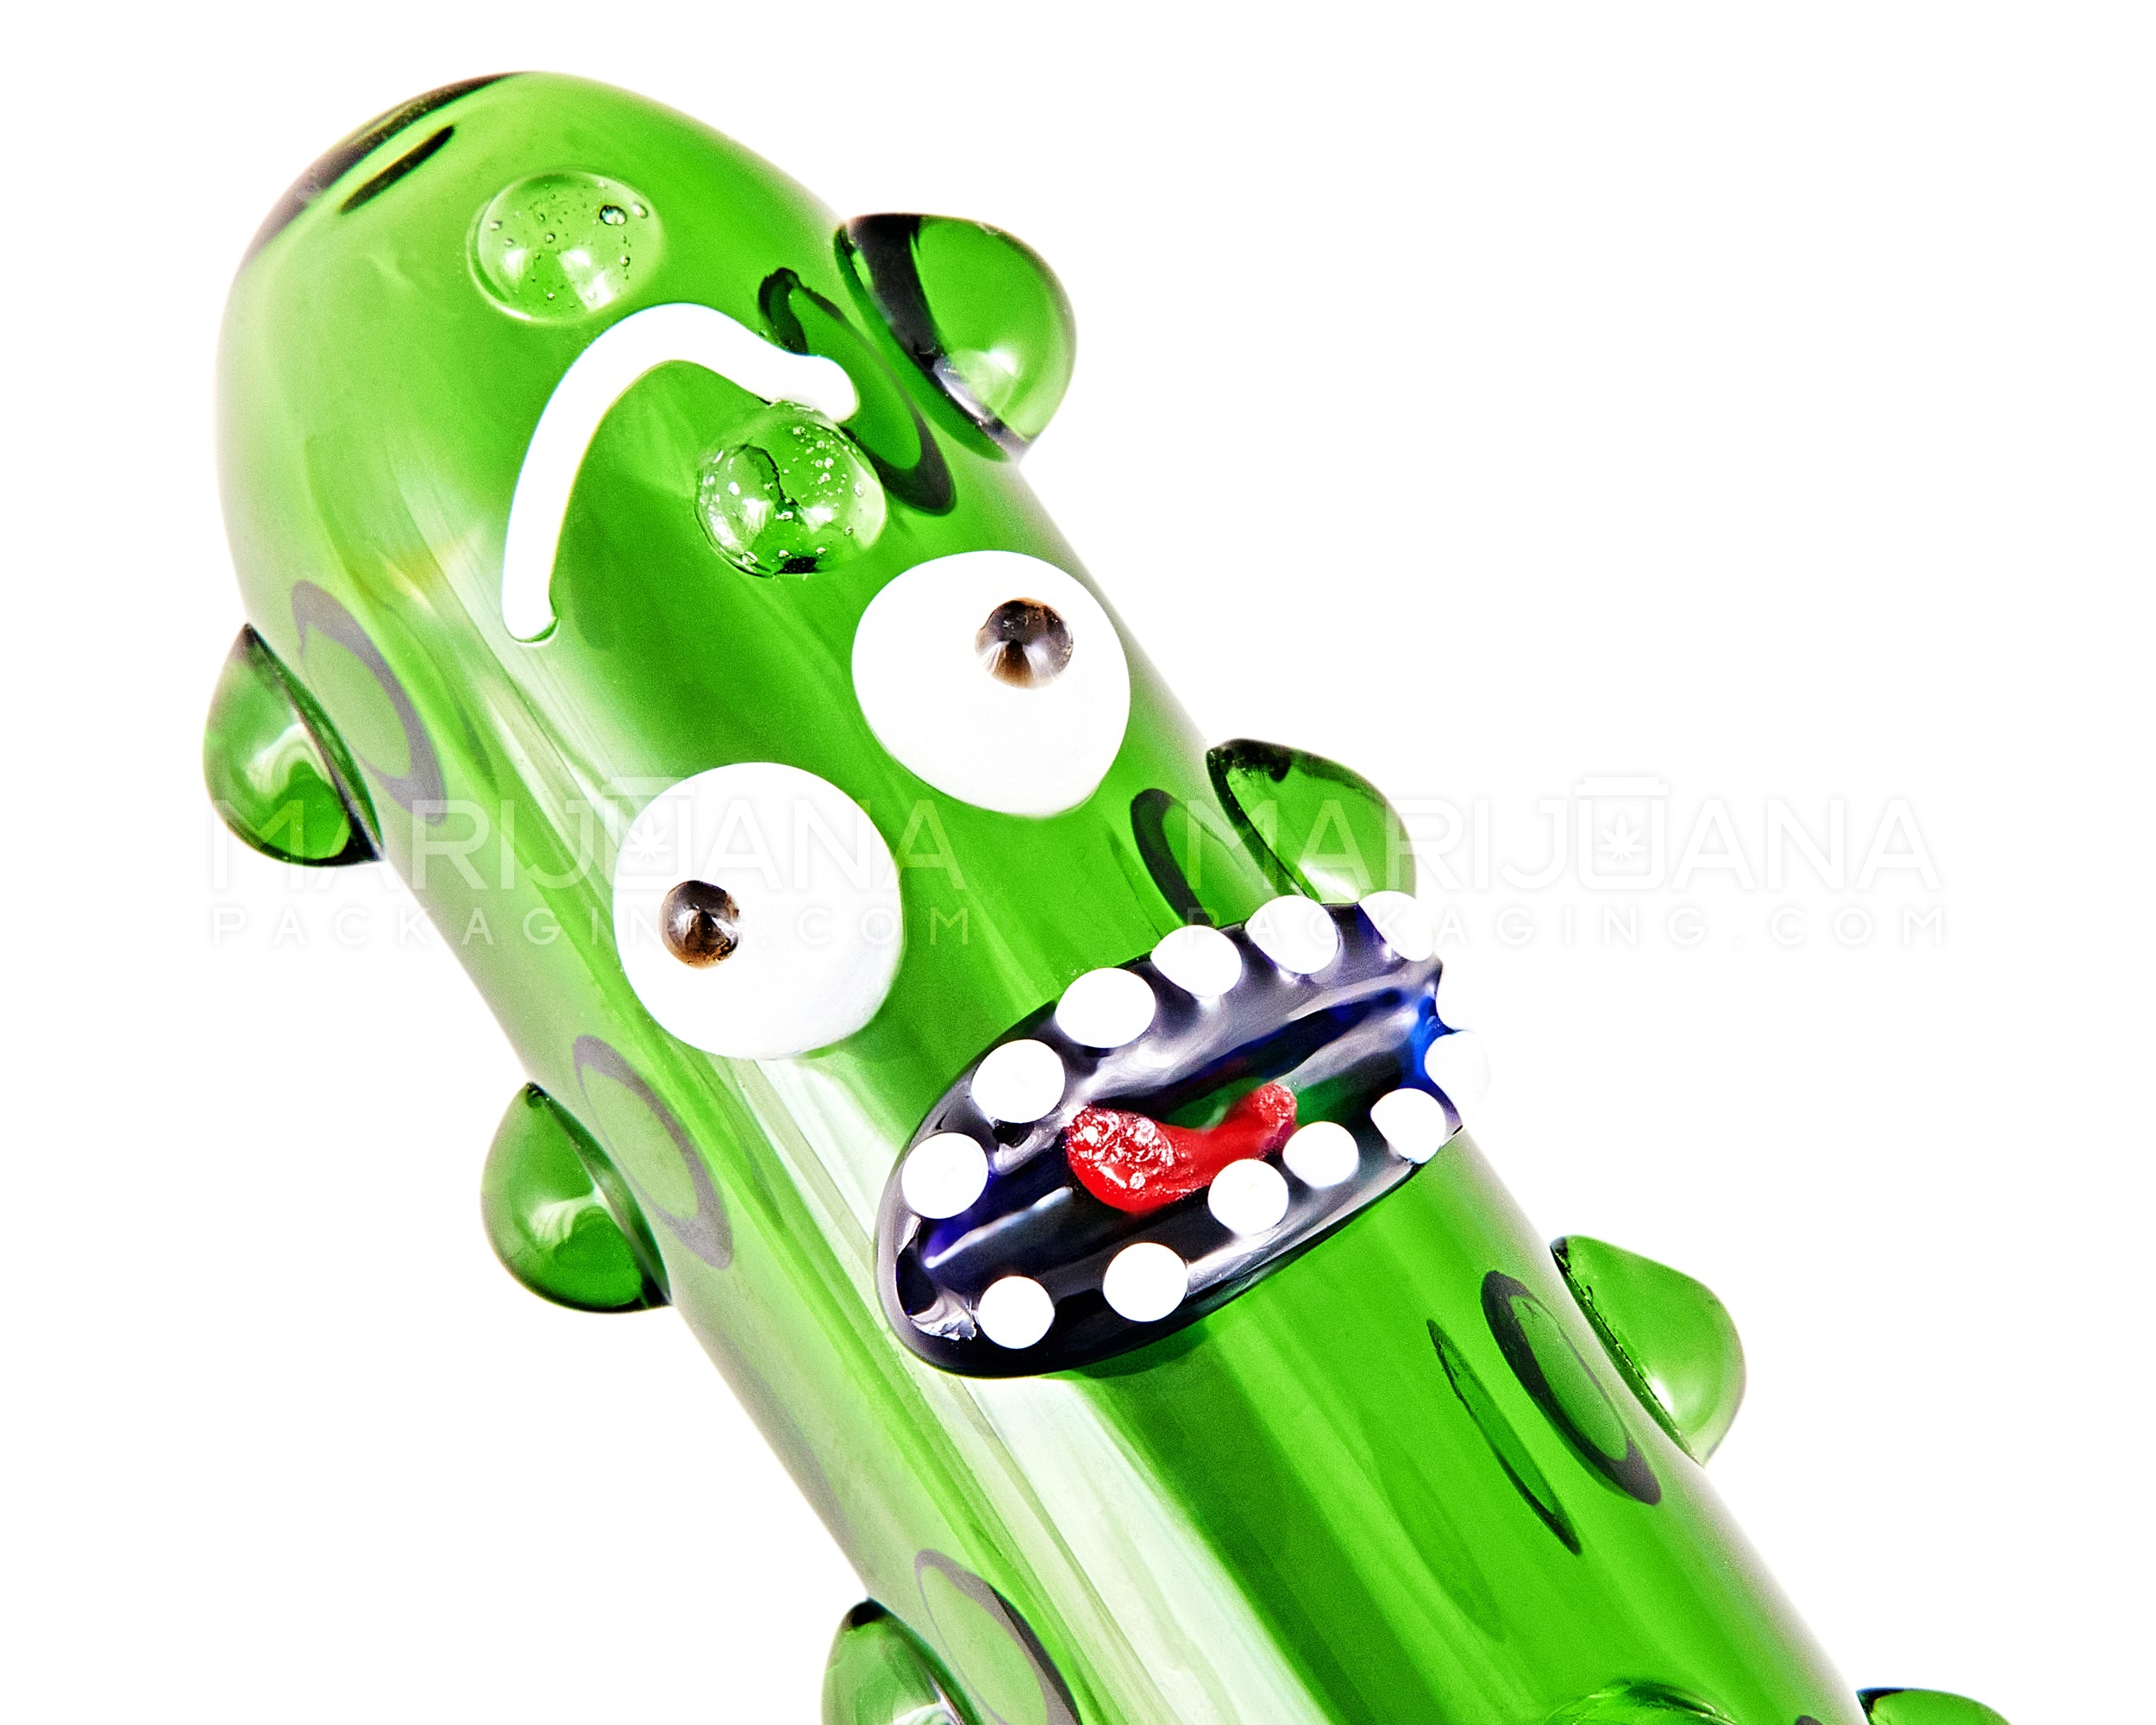 Pickle Rick Steamroller Hand Pipe w/ Multi Knockers | 5.5in Long - Glass - Green - 3